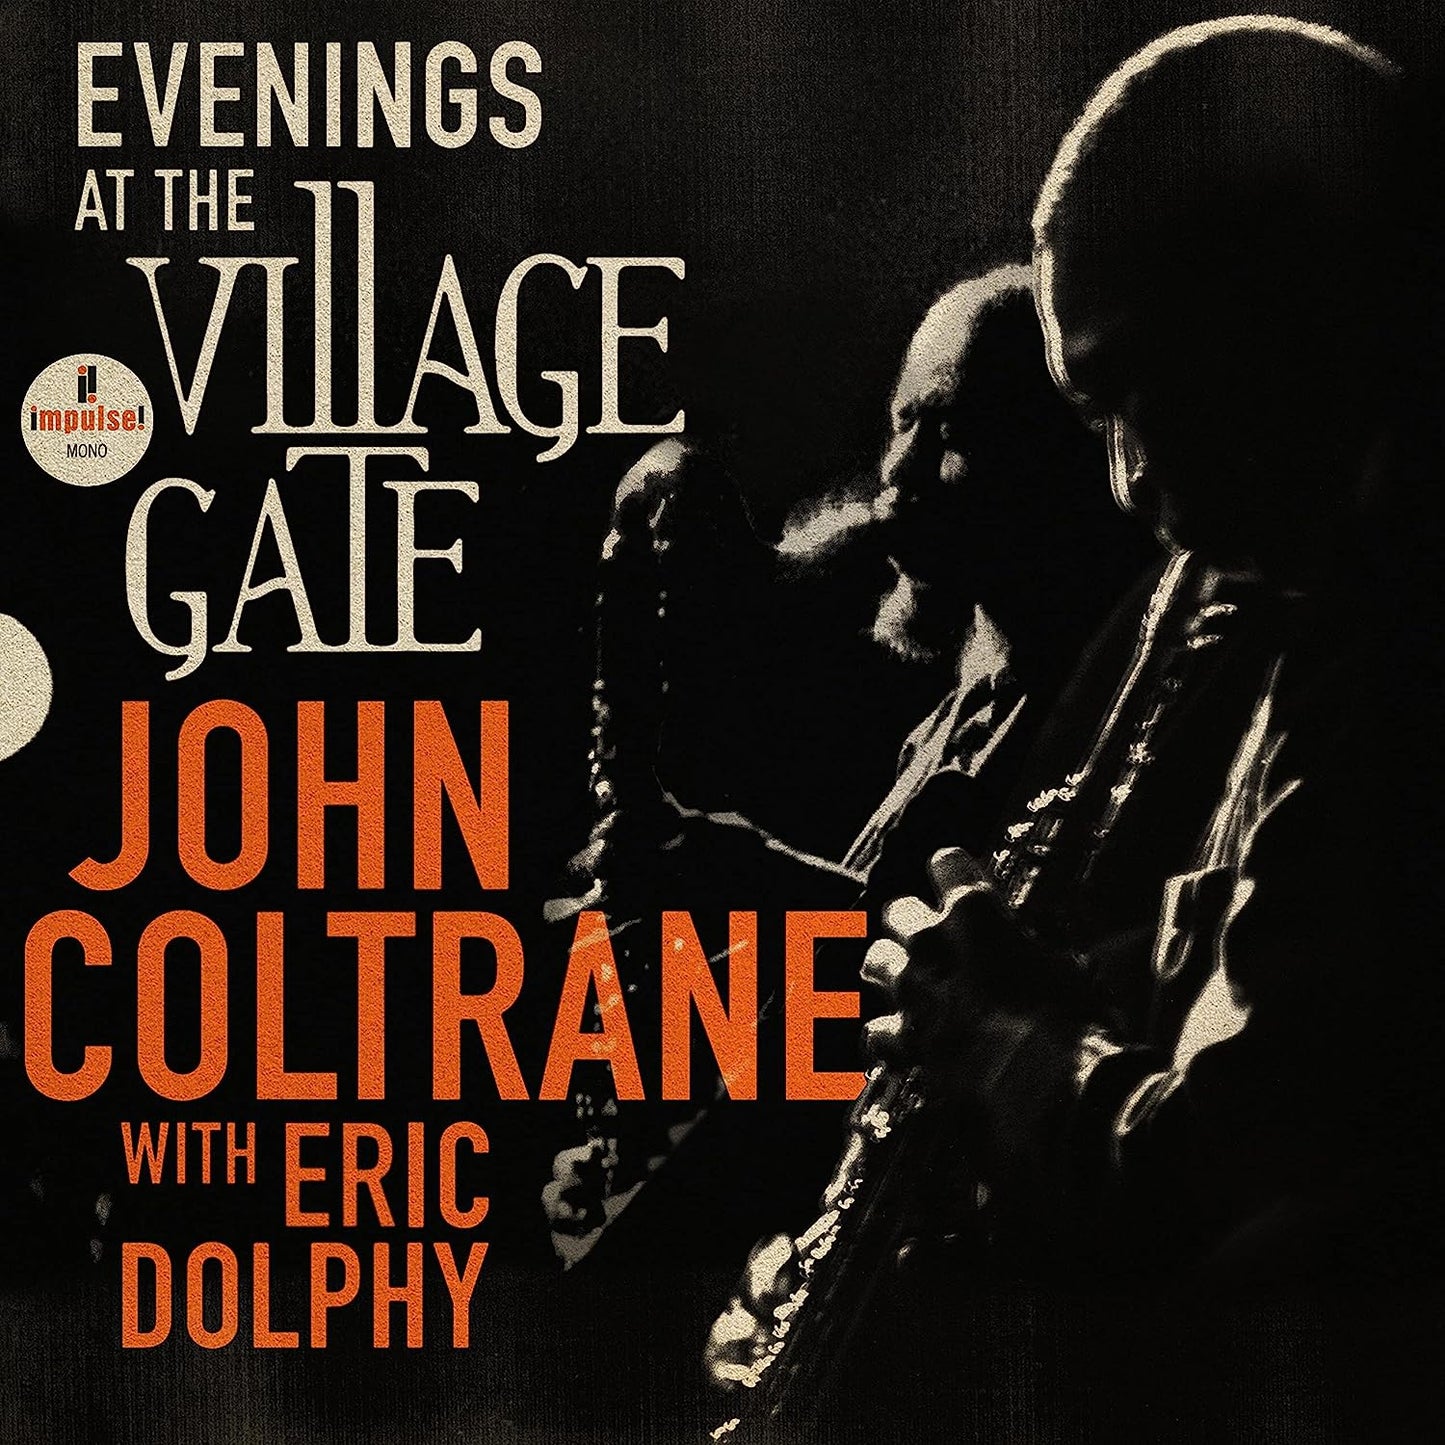 CD - John Coltrane With Eric Dolphy - Evenings At The Village Gate